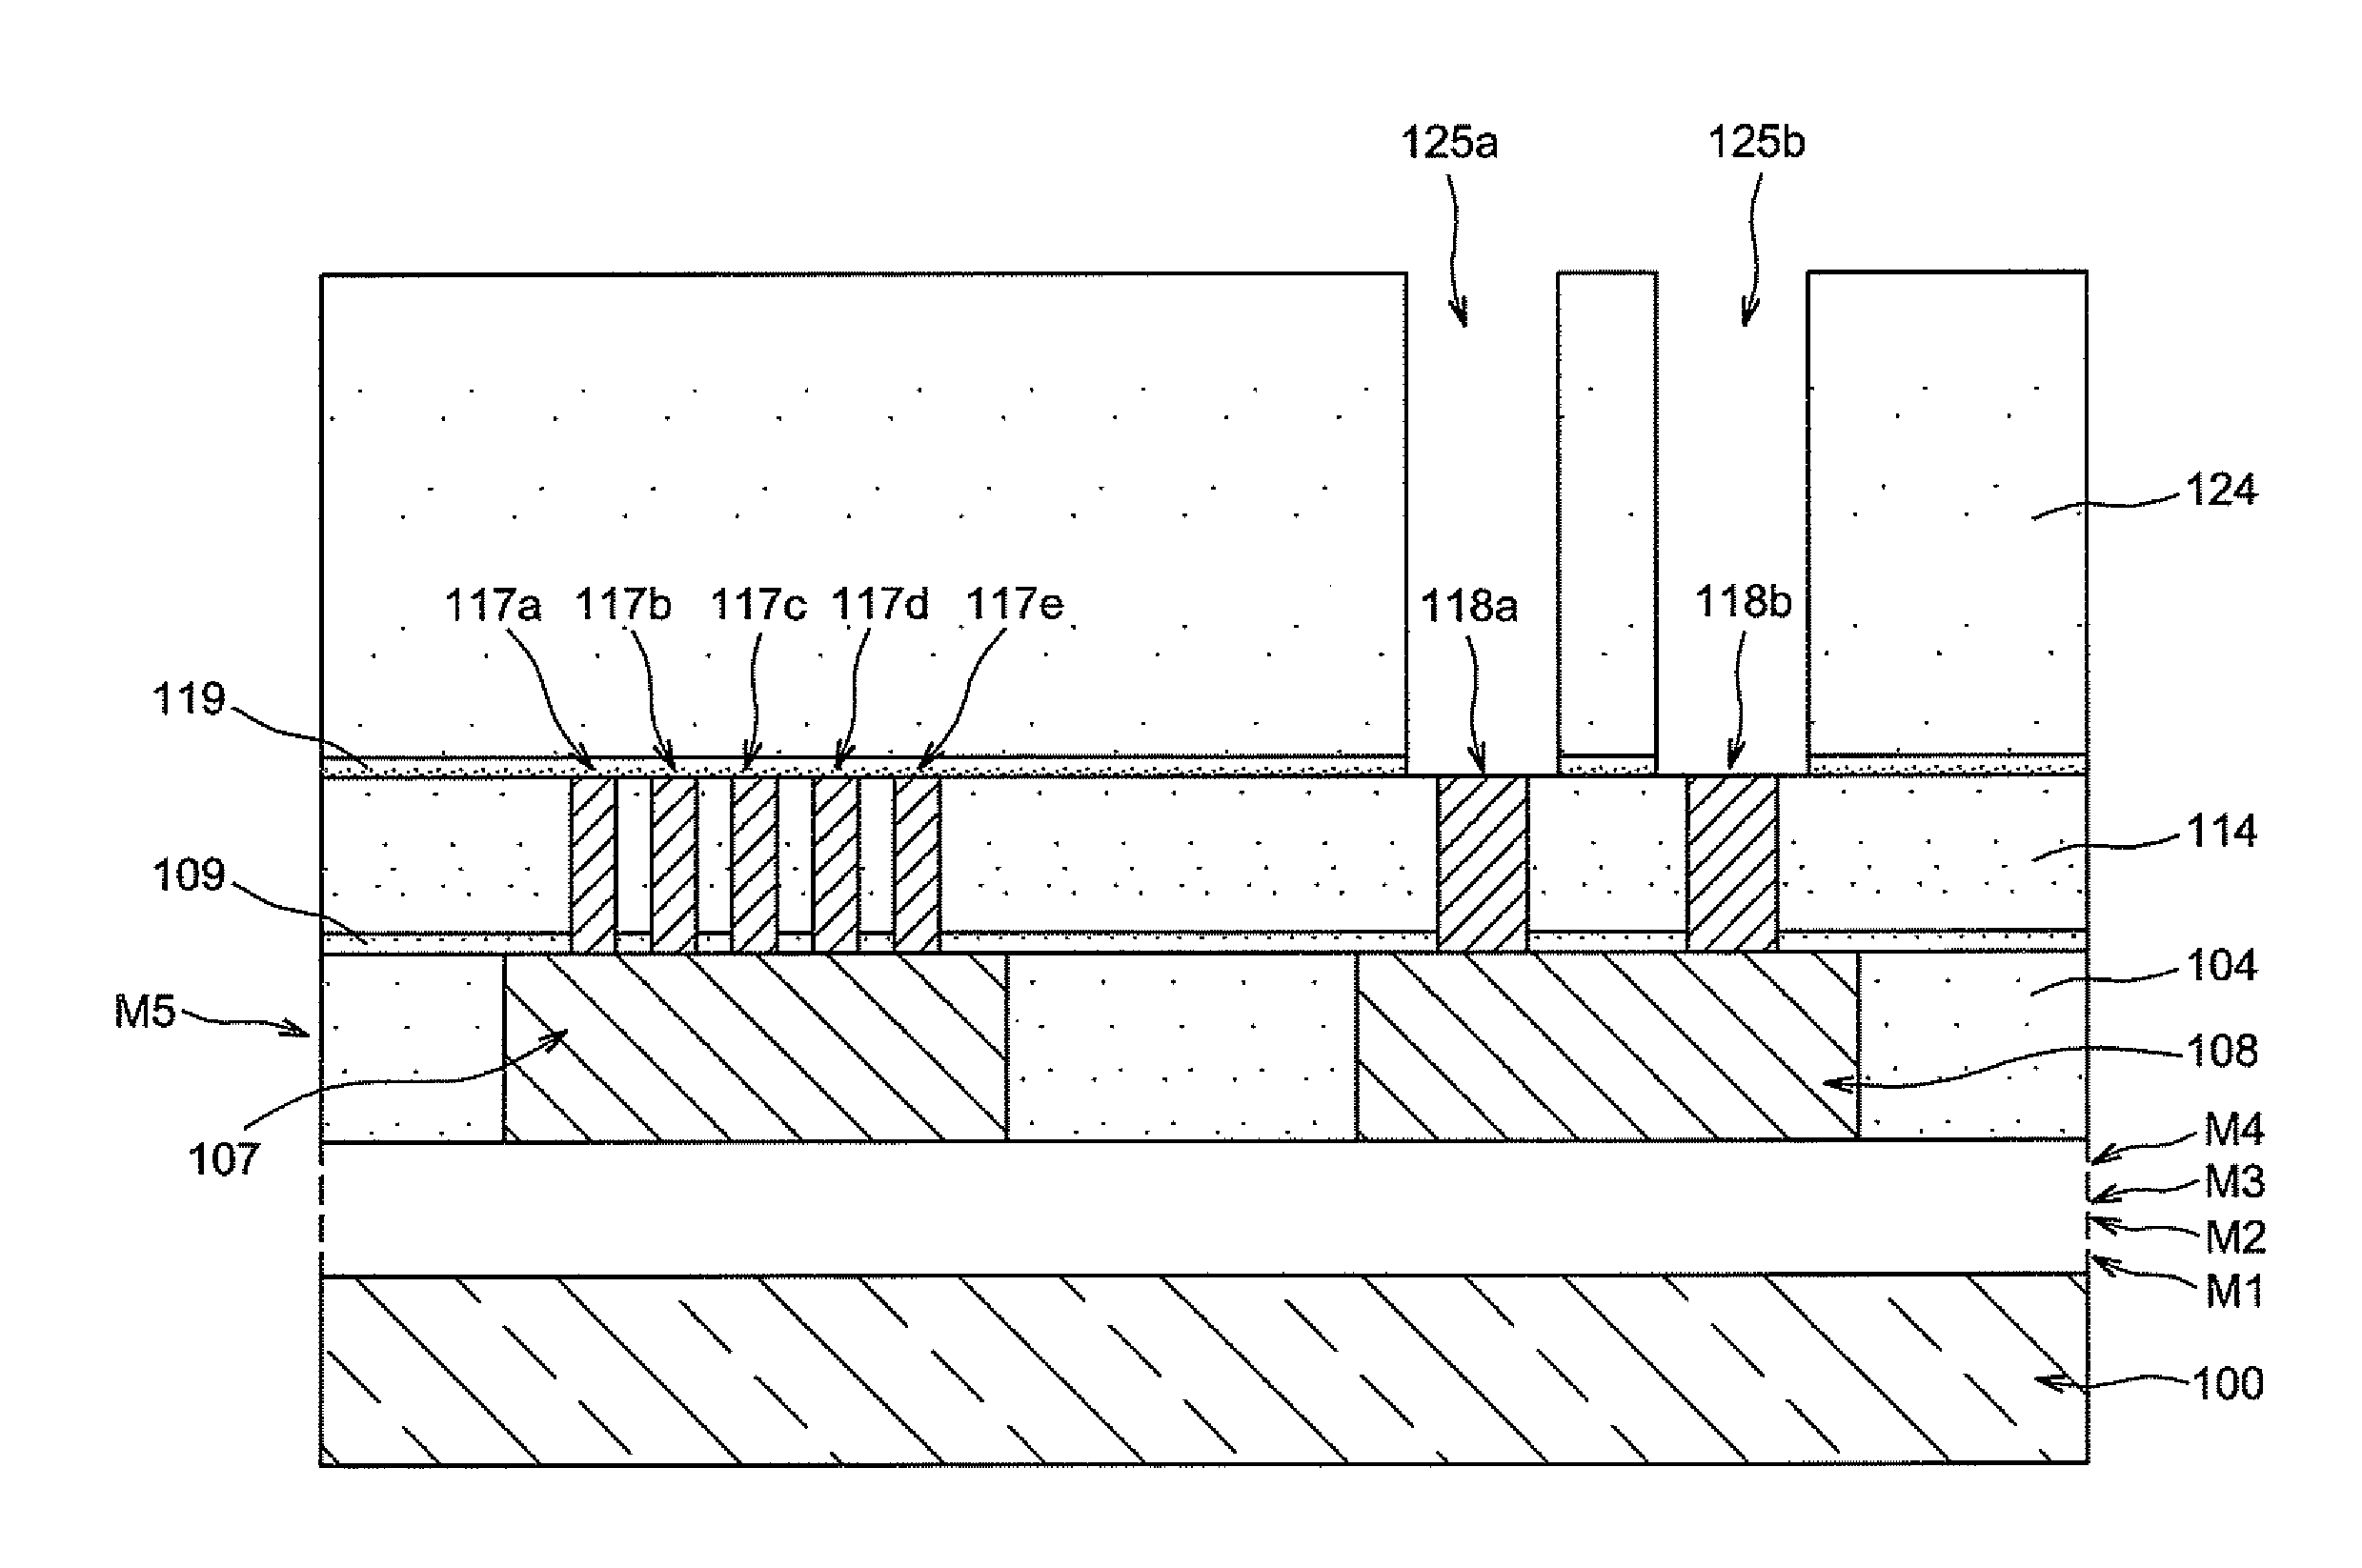 Manufacture of 3 dimensional MIM capacitors in the last metal level of an integrated circuit